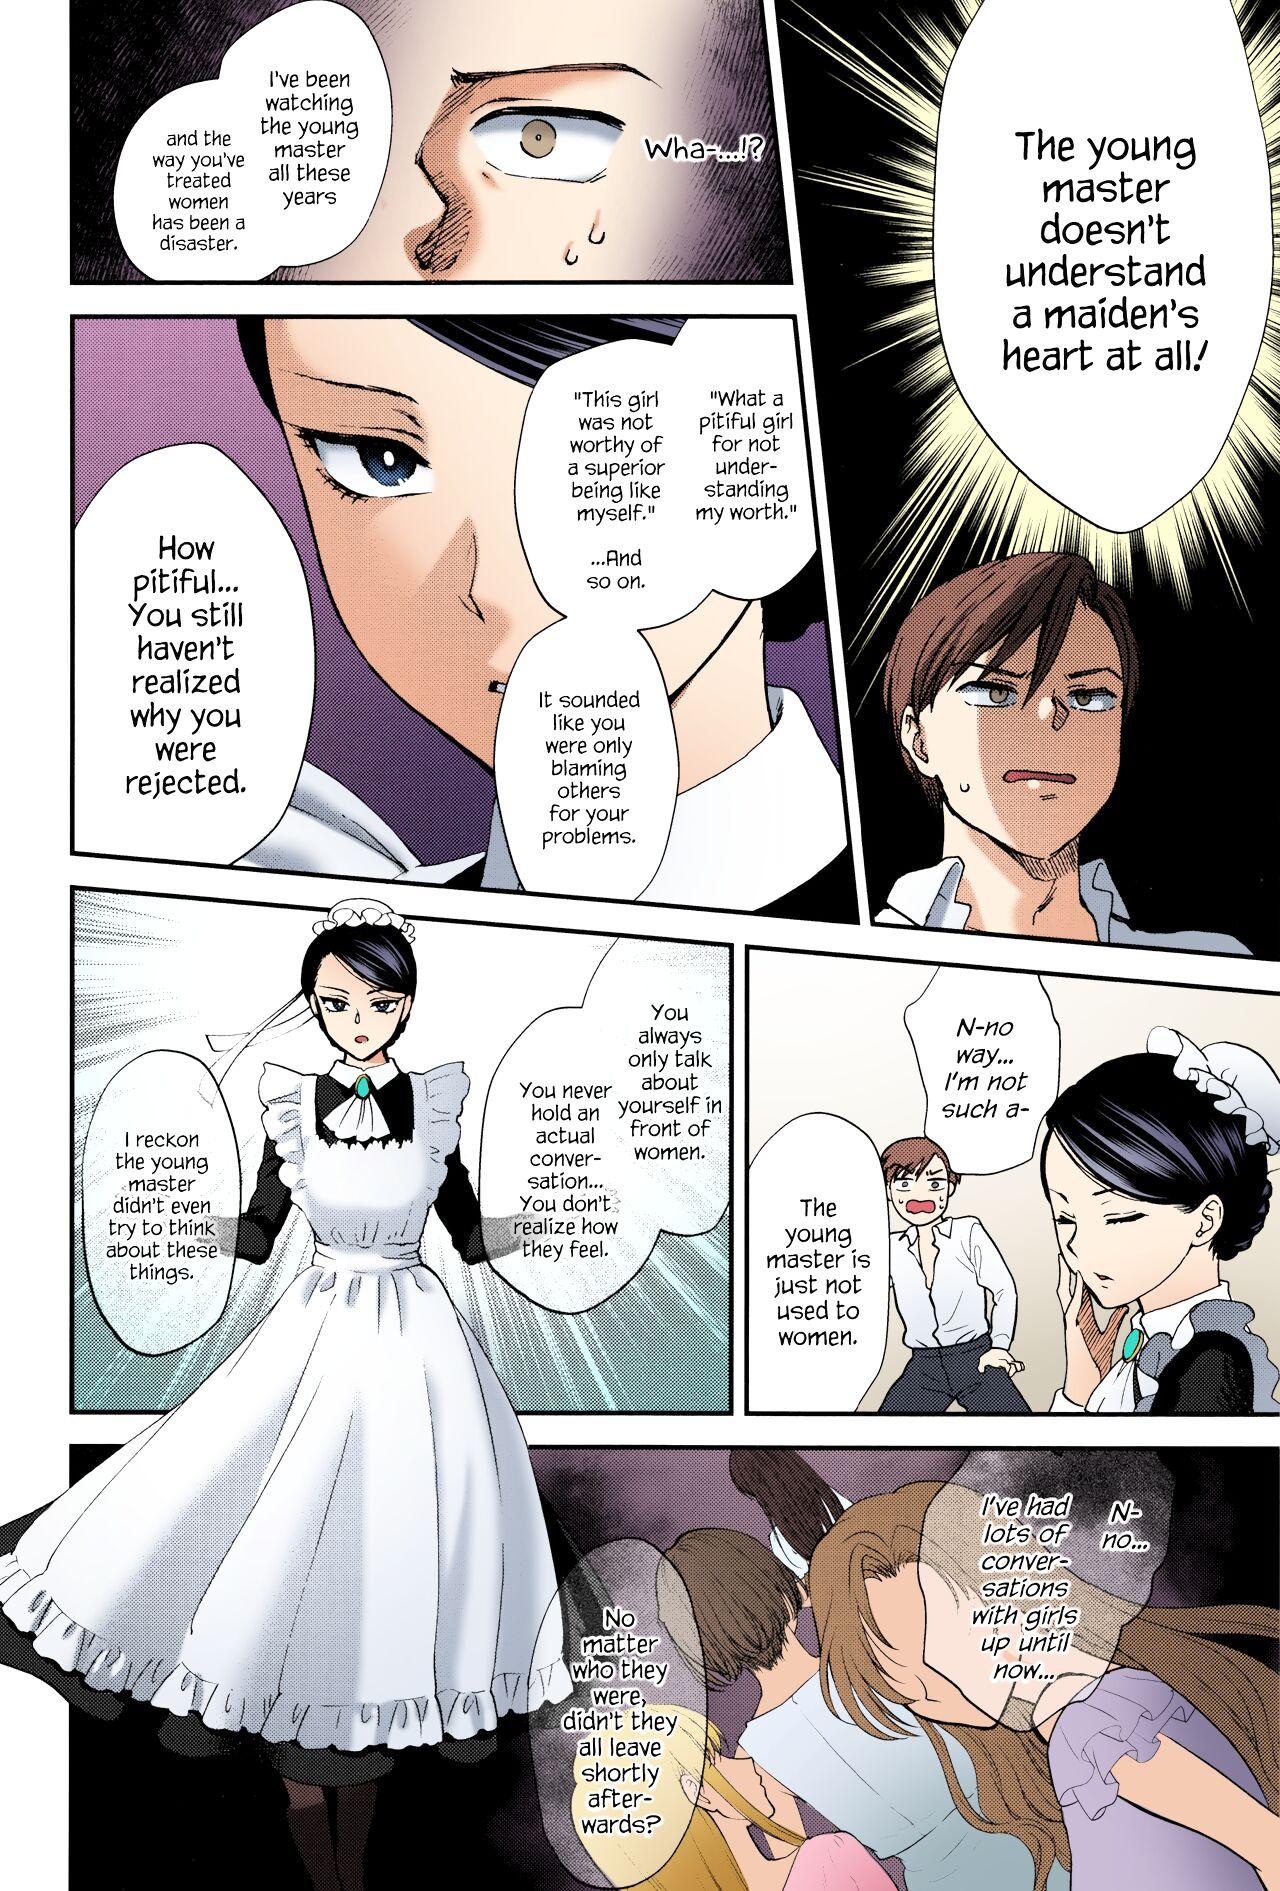 Esposa Kyoudou Well Maid - The Well “Maid” Instructor - Original Wanking - Page 4